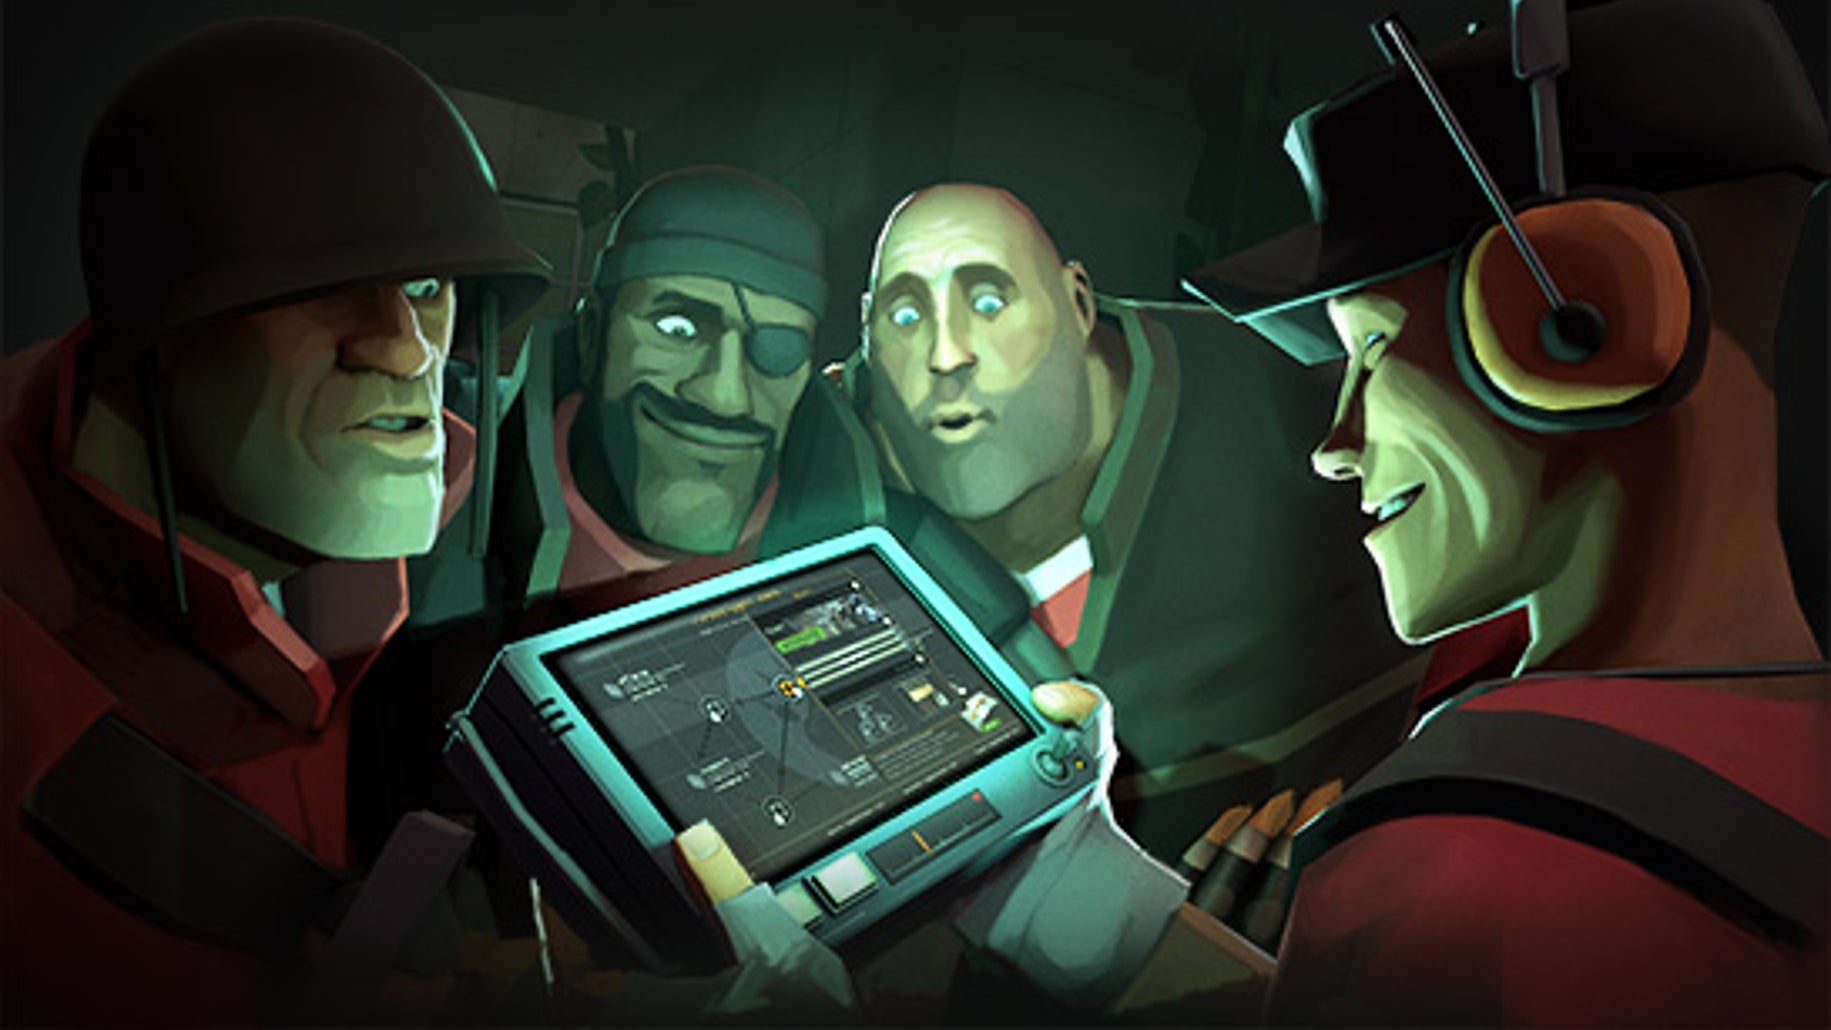 Team Fortress 2 is a free-to-play team shooter made by Valve.